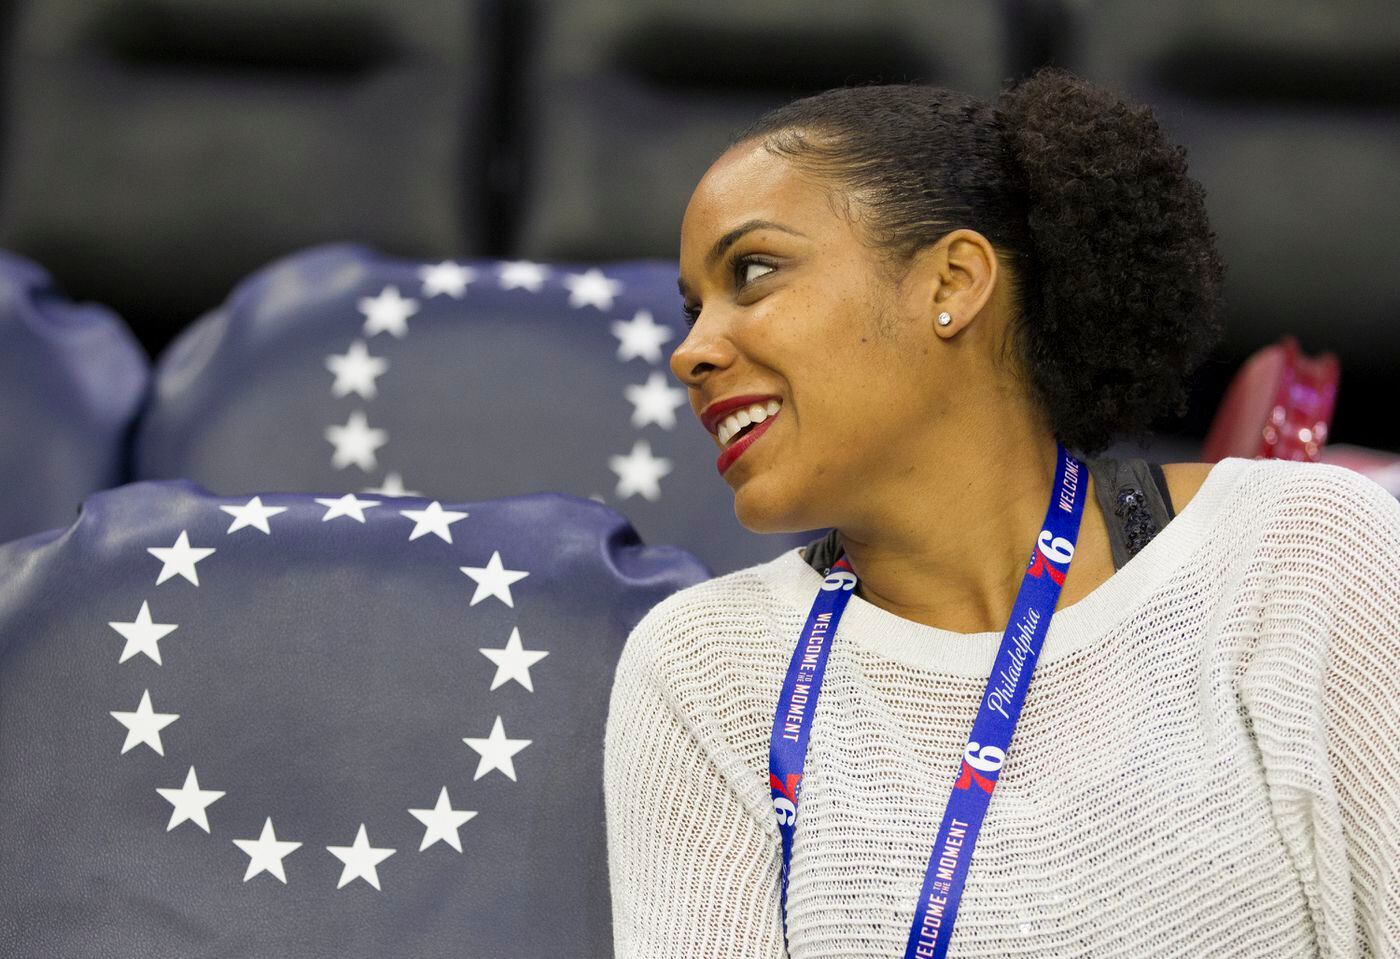 Lindsey Harding was hired last year as a pro scout. She was promoted this month to player development coach, making her just the seventh female coach in NBA history.